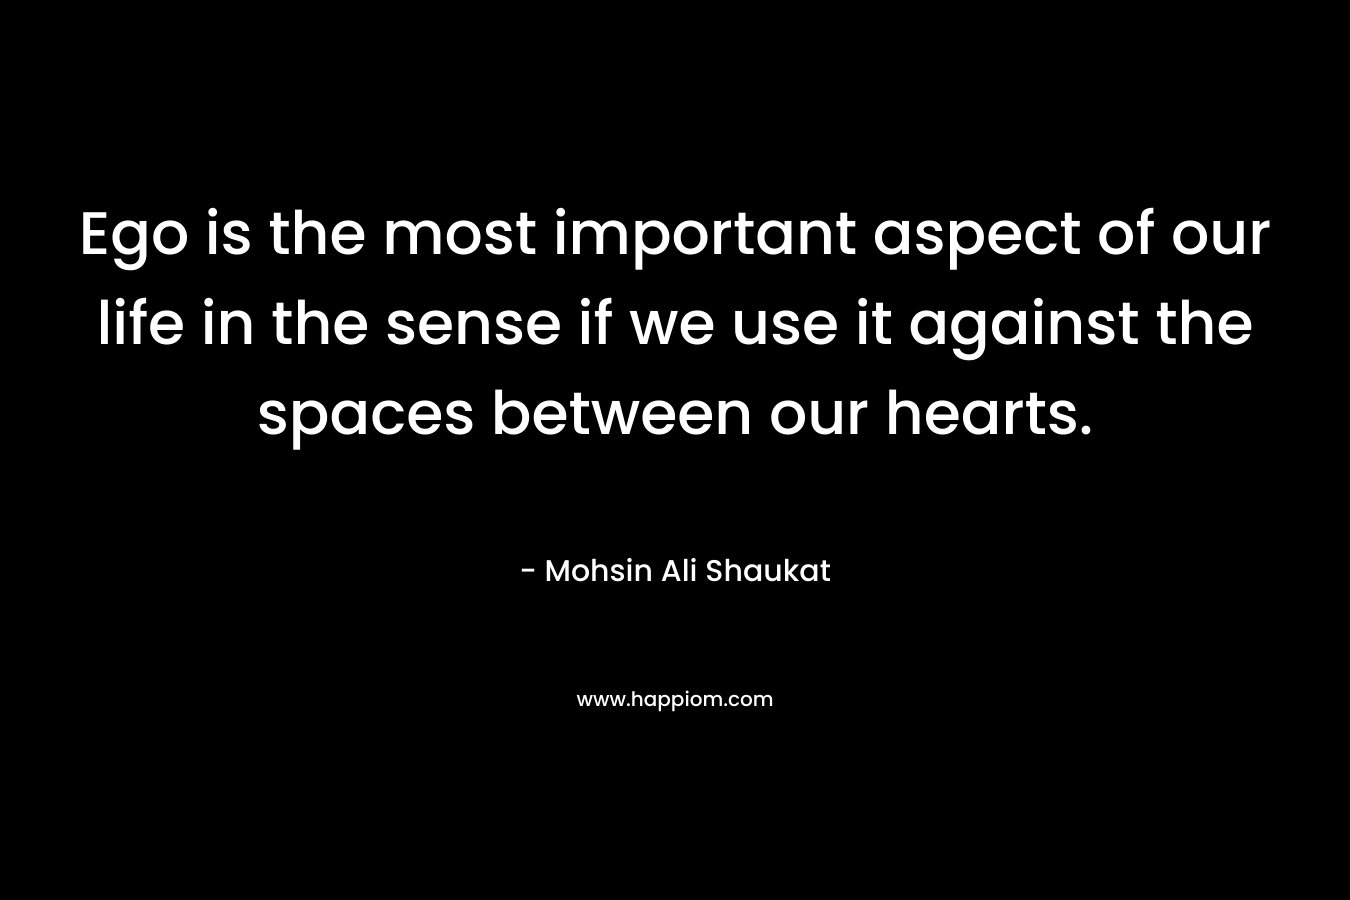 Ego is the most important aspect of our life in the sense if we use it against the spaces between our hearts. – Mohsin Ali Shaukat